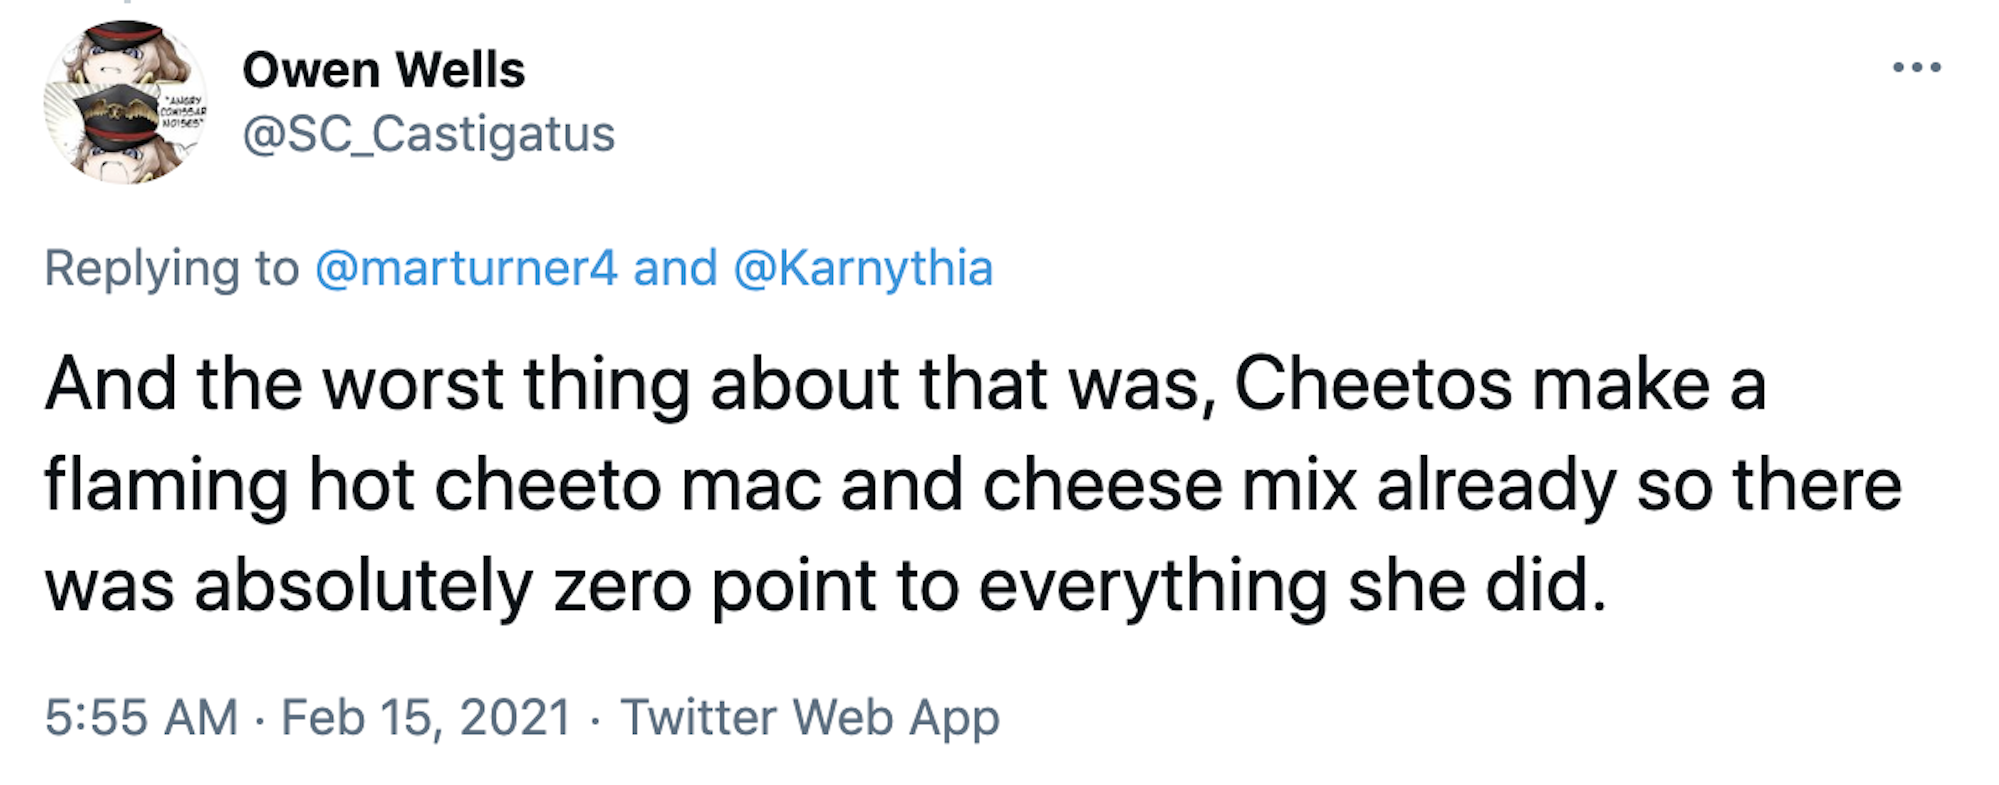 And the worst thing about that was, Cheetos make a flaming hot cheeto mac and cheese mix already so there was absolutely zero point to everything she did.